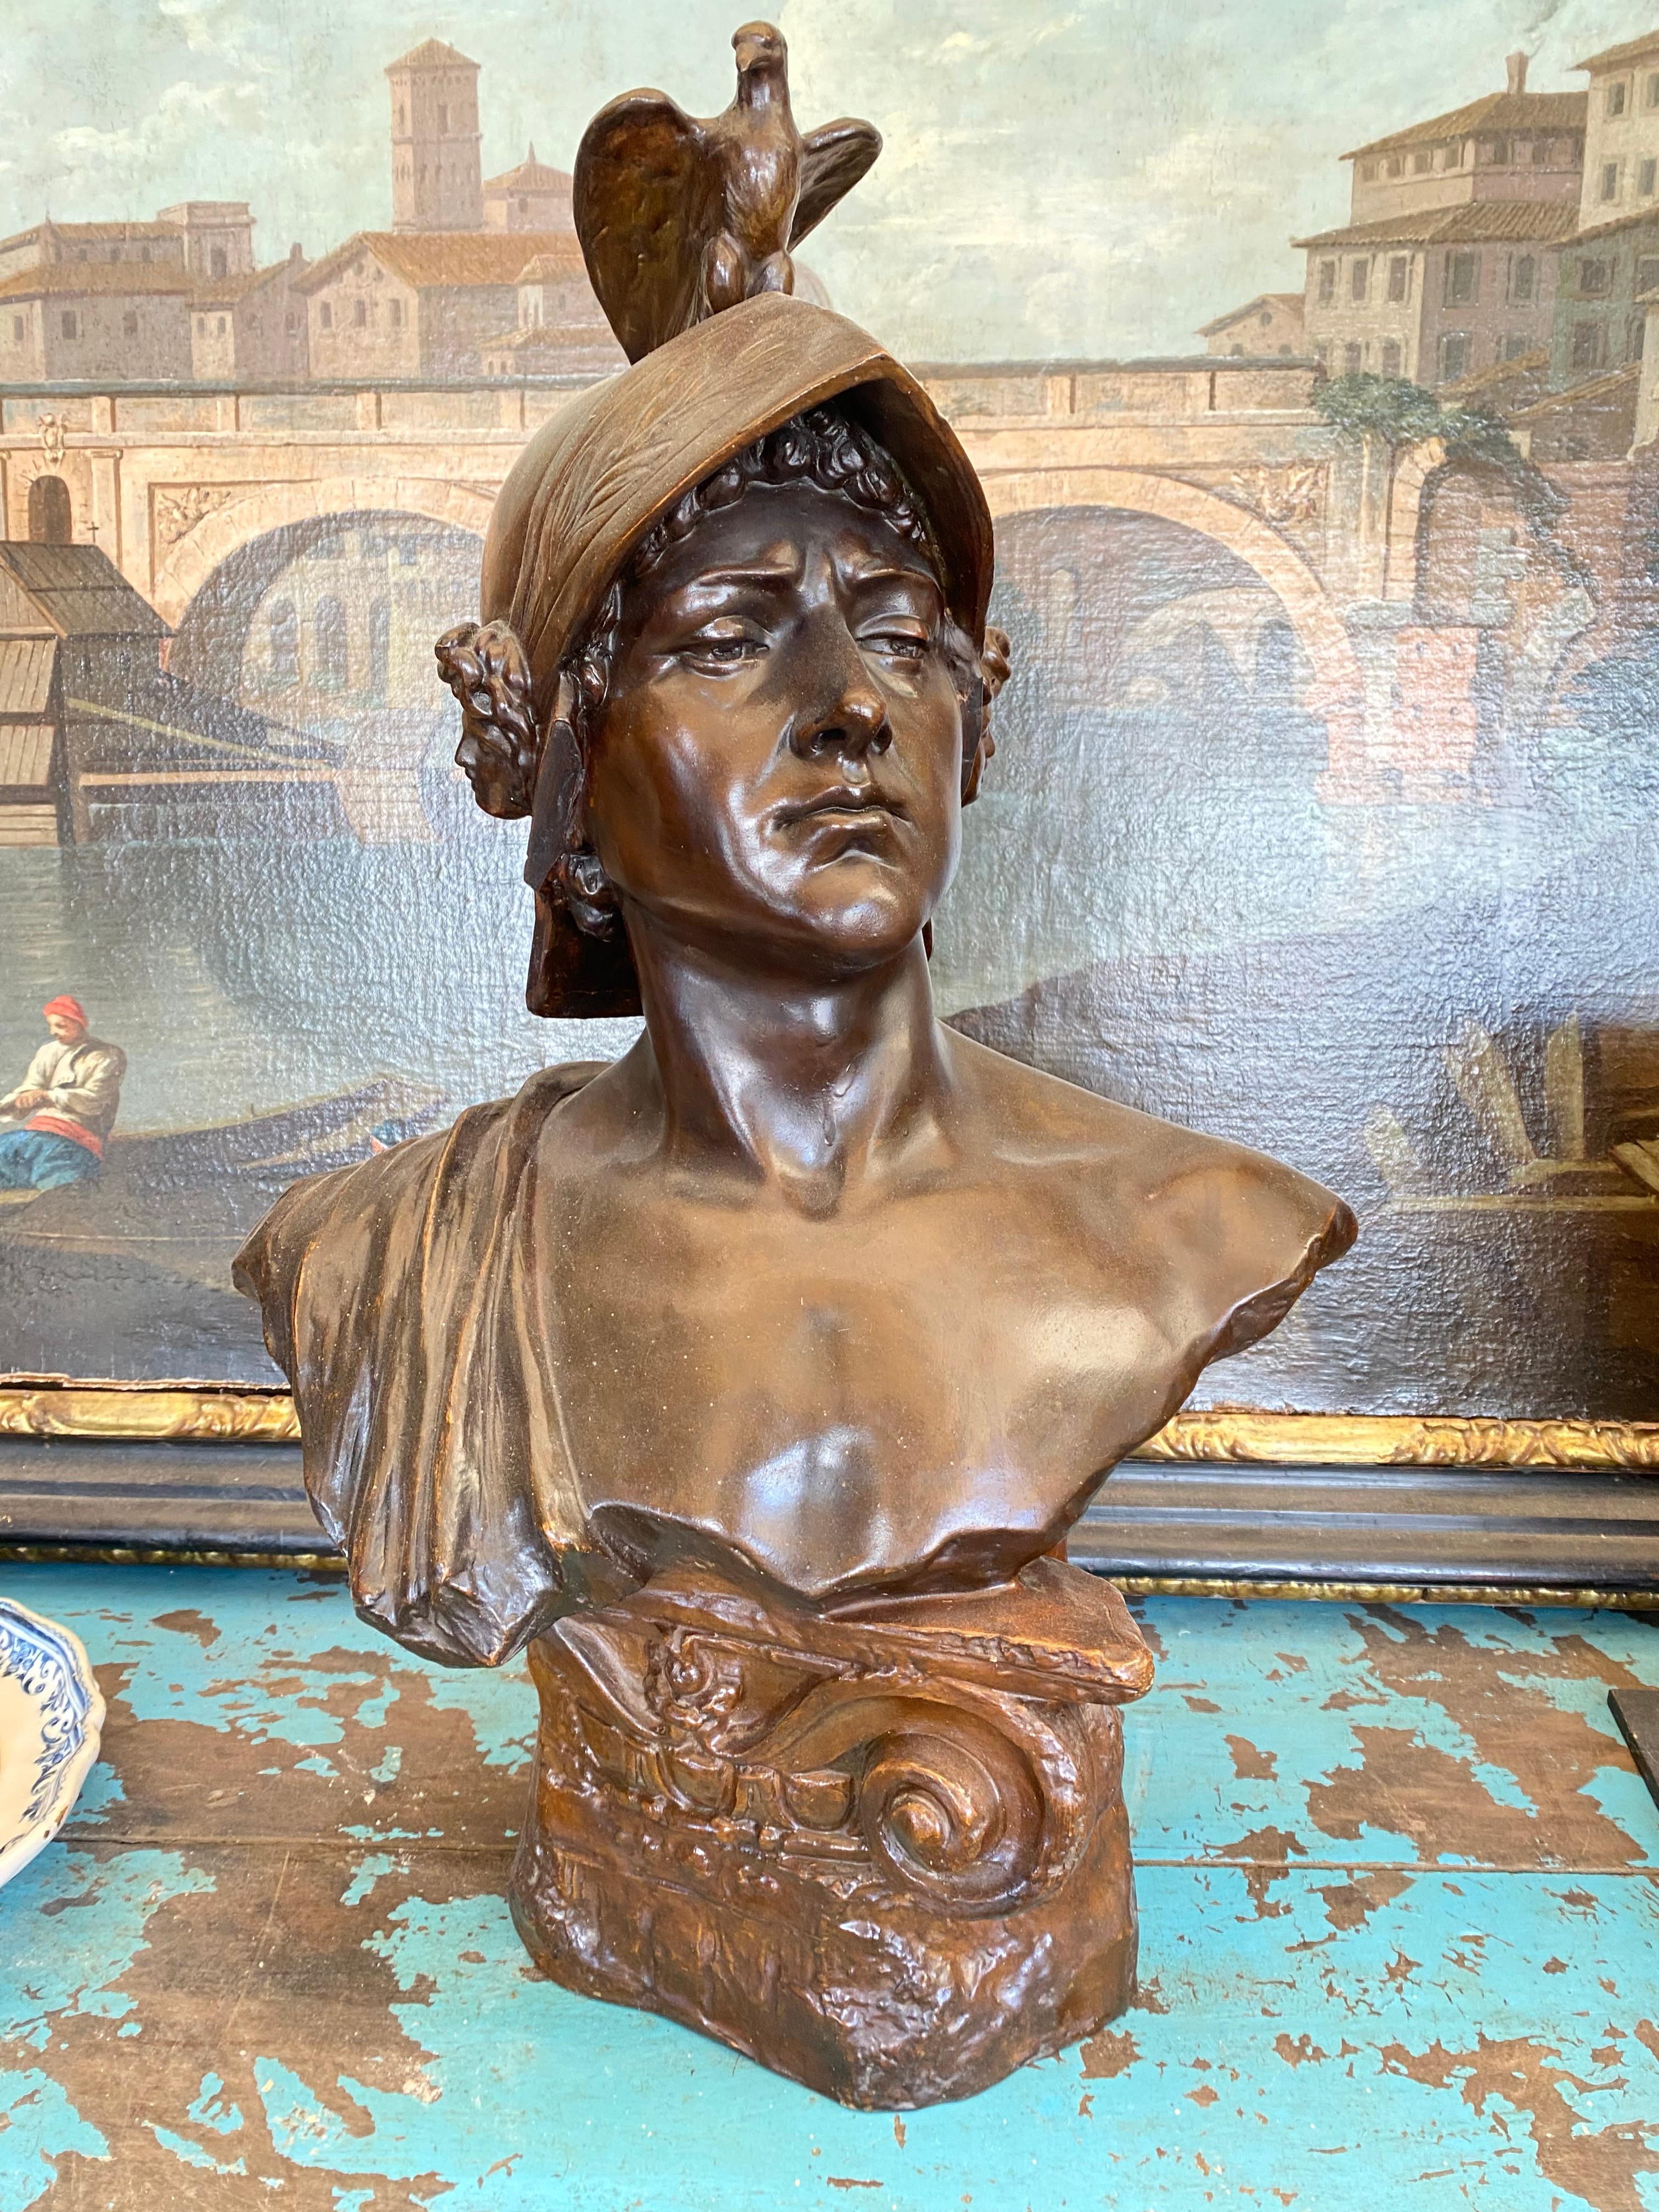 Terracotta bust representing a Roman soldier by the famous Goldscheider factory in Austria
Model made by Otto Pétri
Manufacturing stamp with mold number
patinated bronze
The bust rests on a capital
Excellent condition 